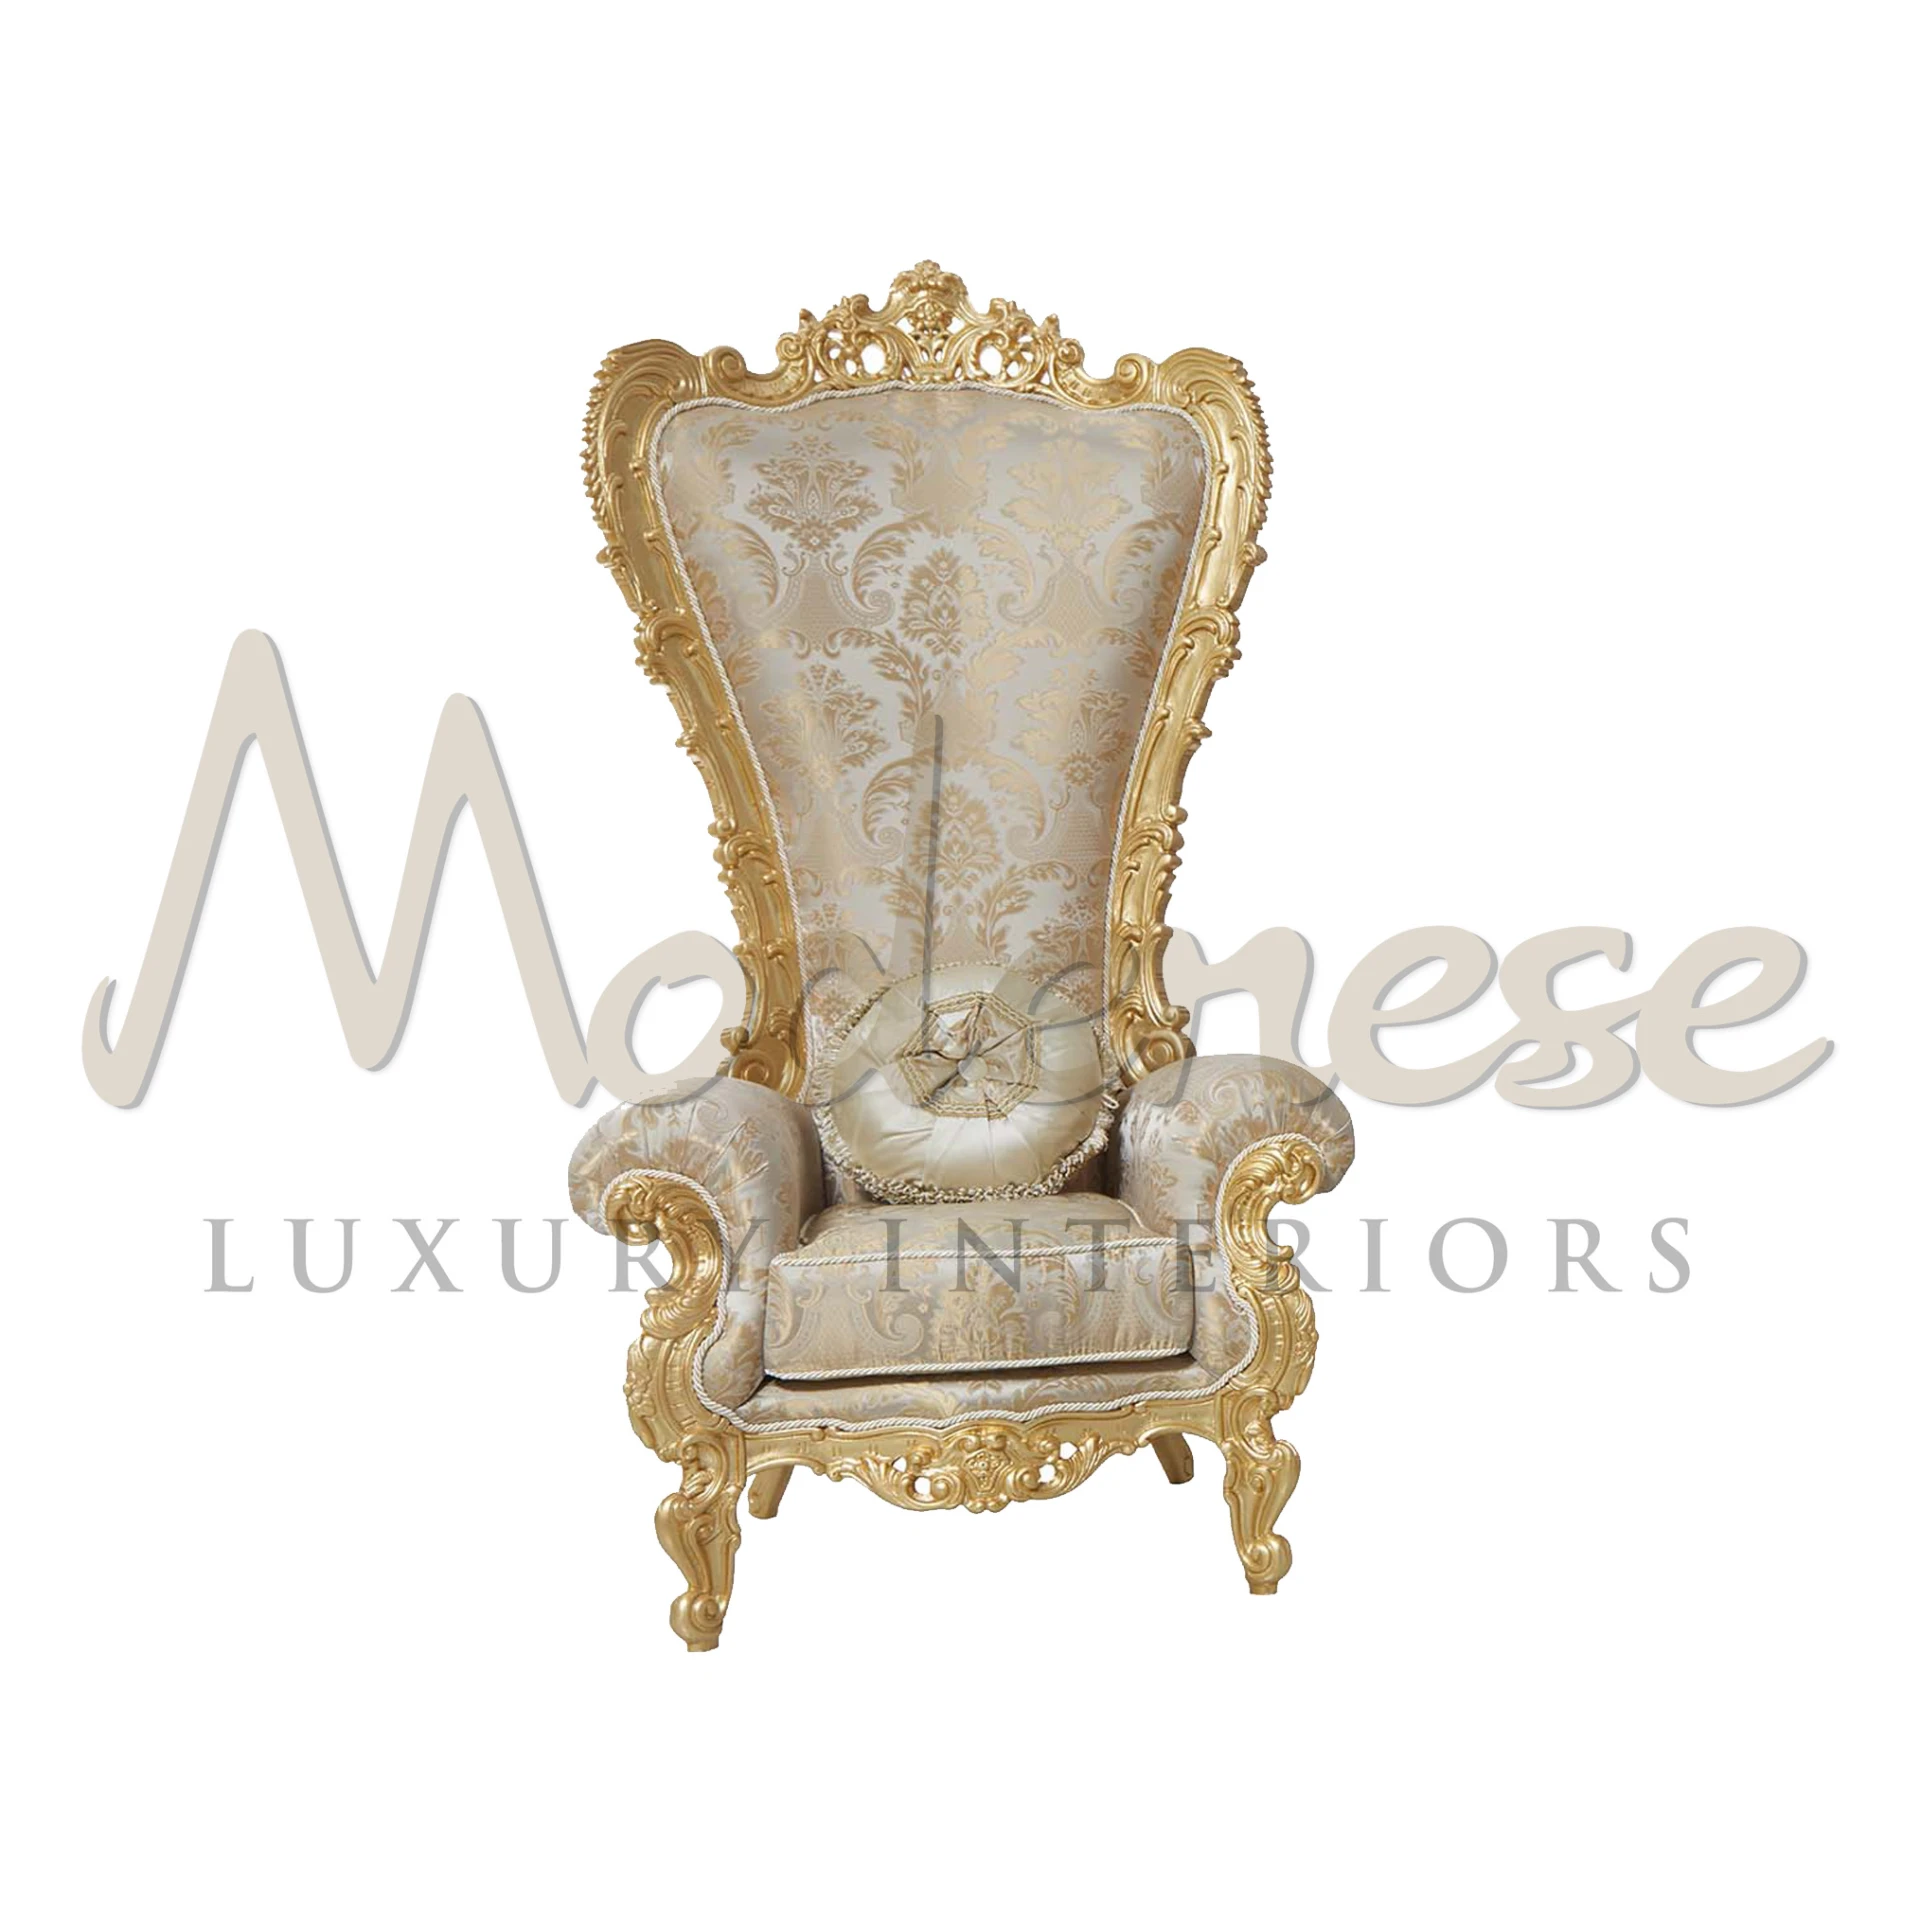 Elegant Royal Throne Armchair with fine wood and original engravings, showcasing the pure 'Made in Italy' craftsmanship.